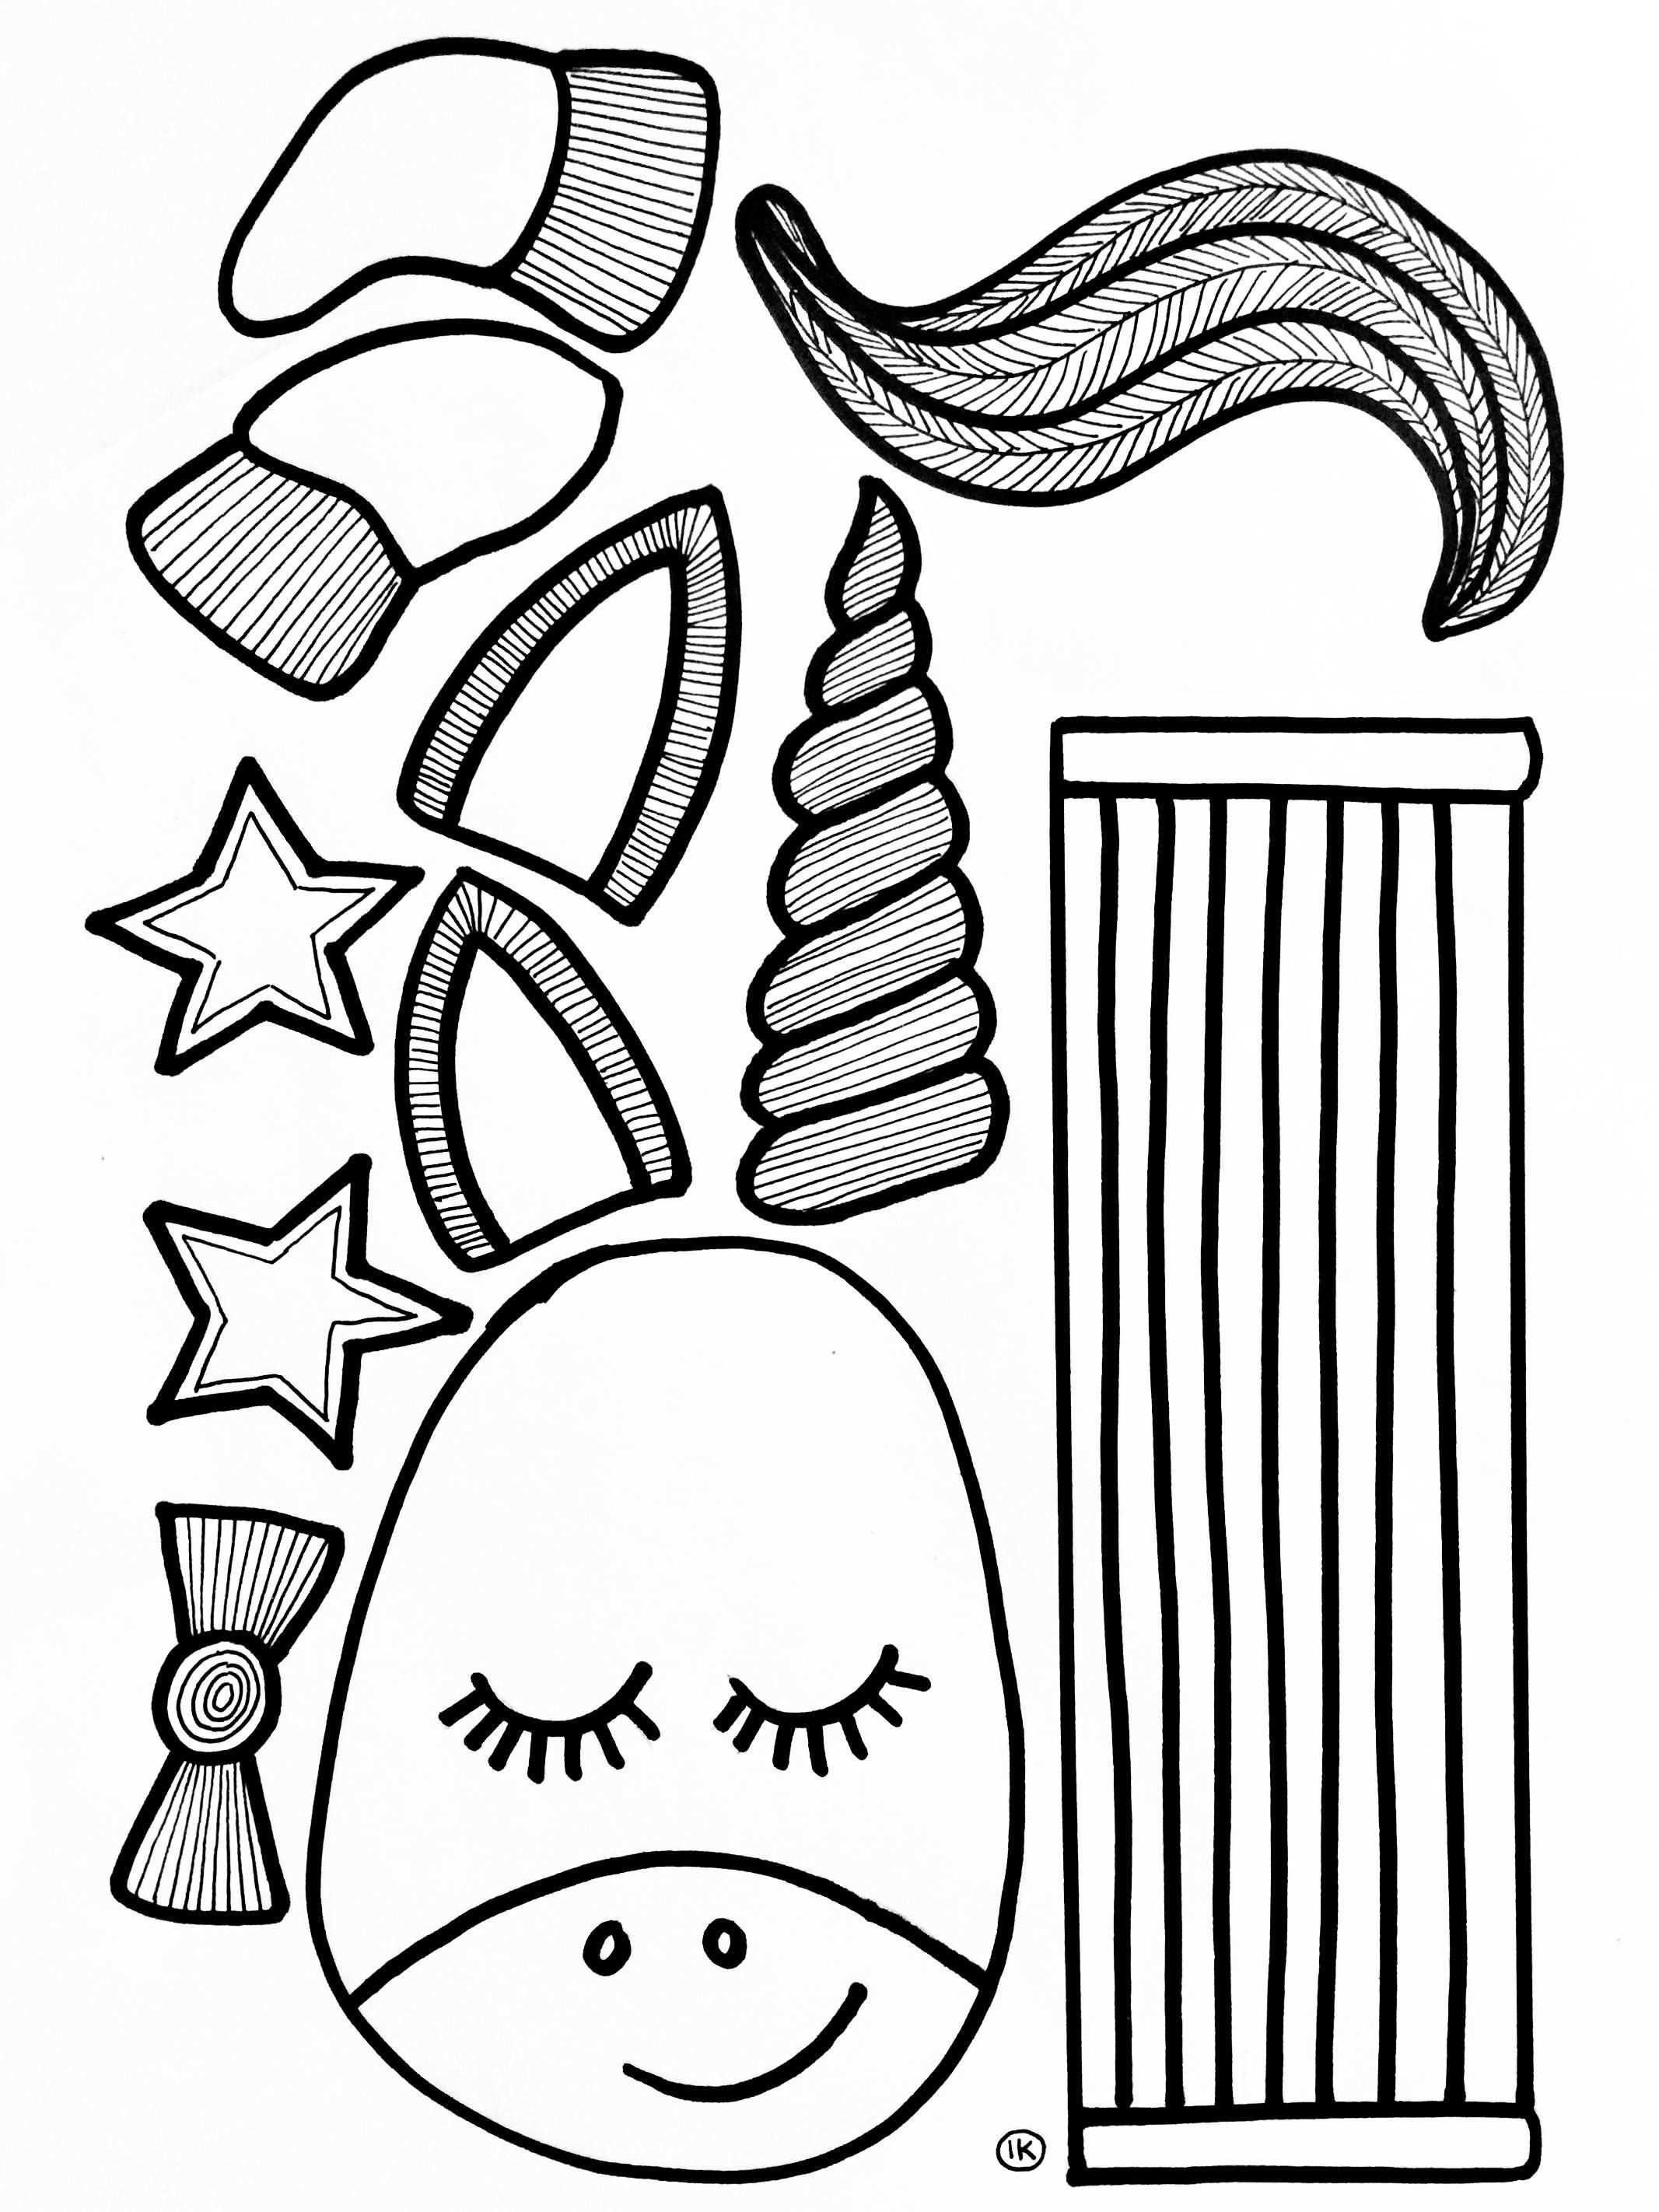 Unicorn Masks To Print And Color Free Printable With Images